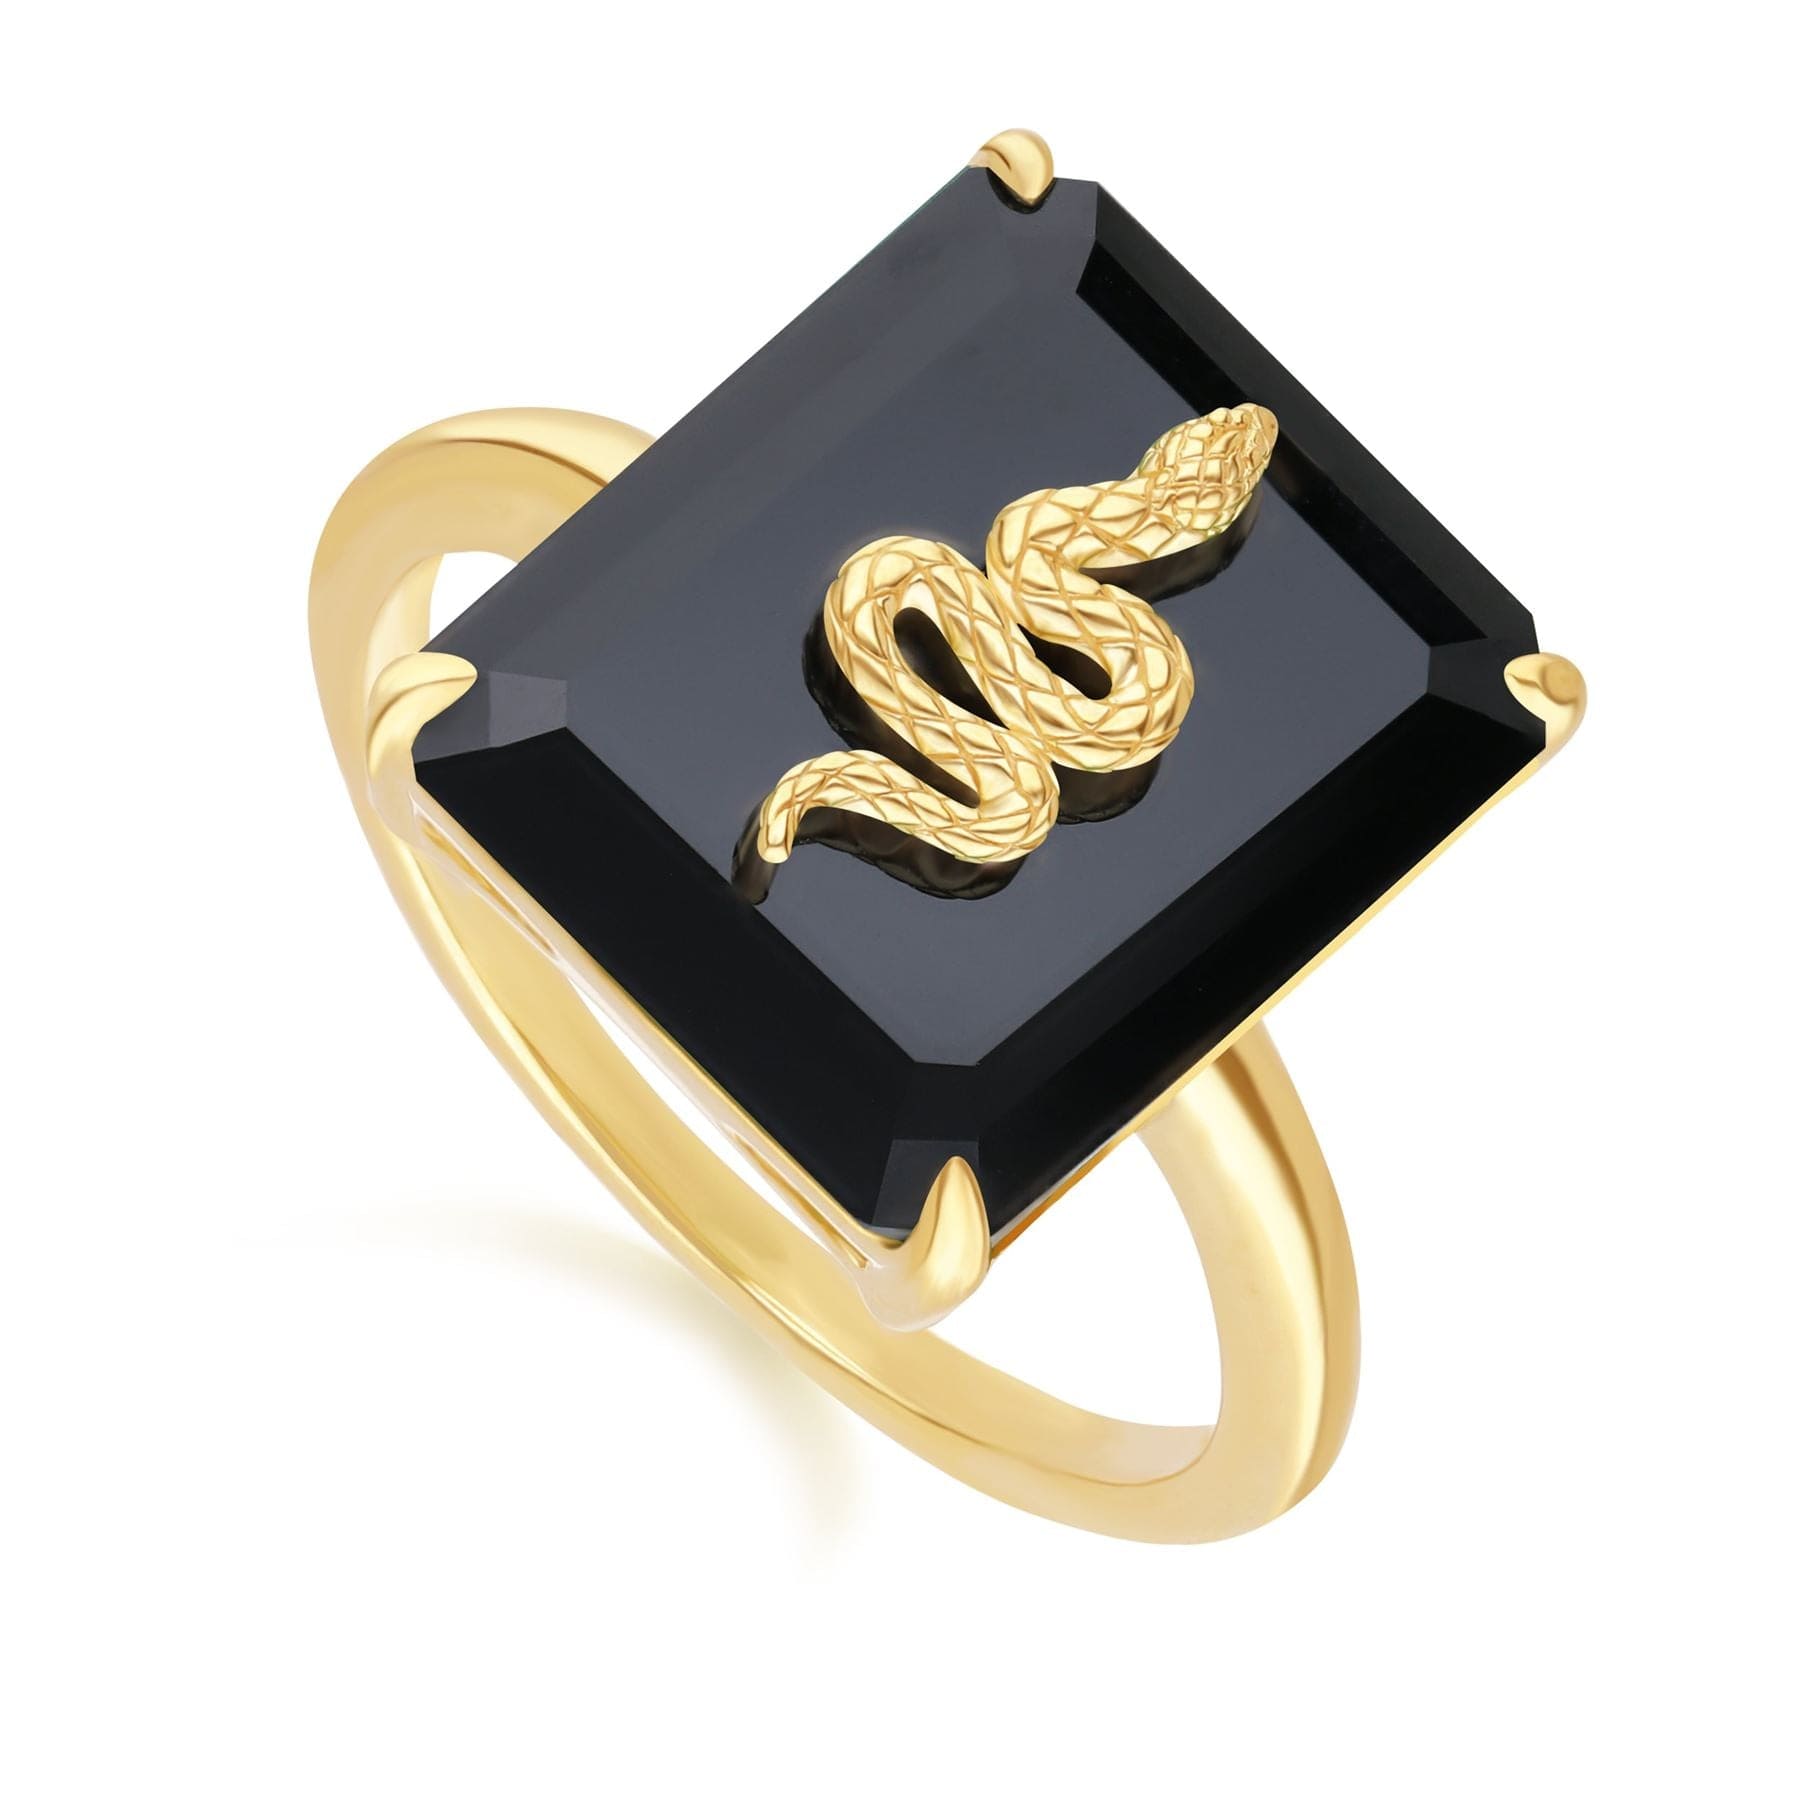 Grand Deco Black Onyx Snake Ring in Gold Plated Sterling Silver - Gemondo